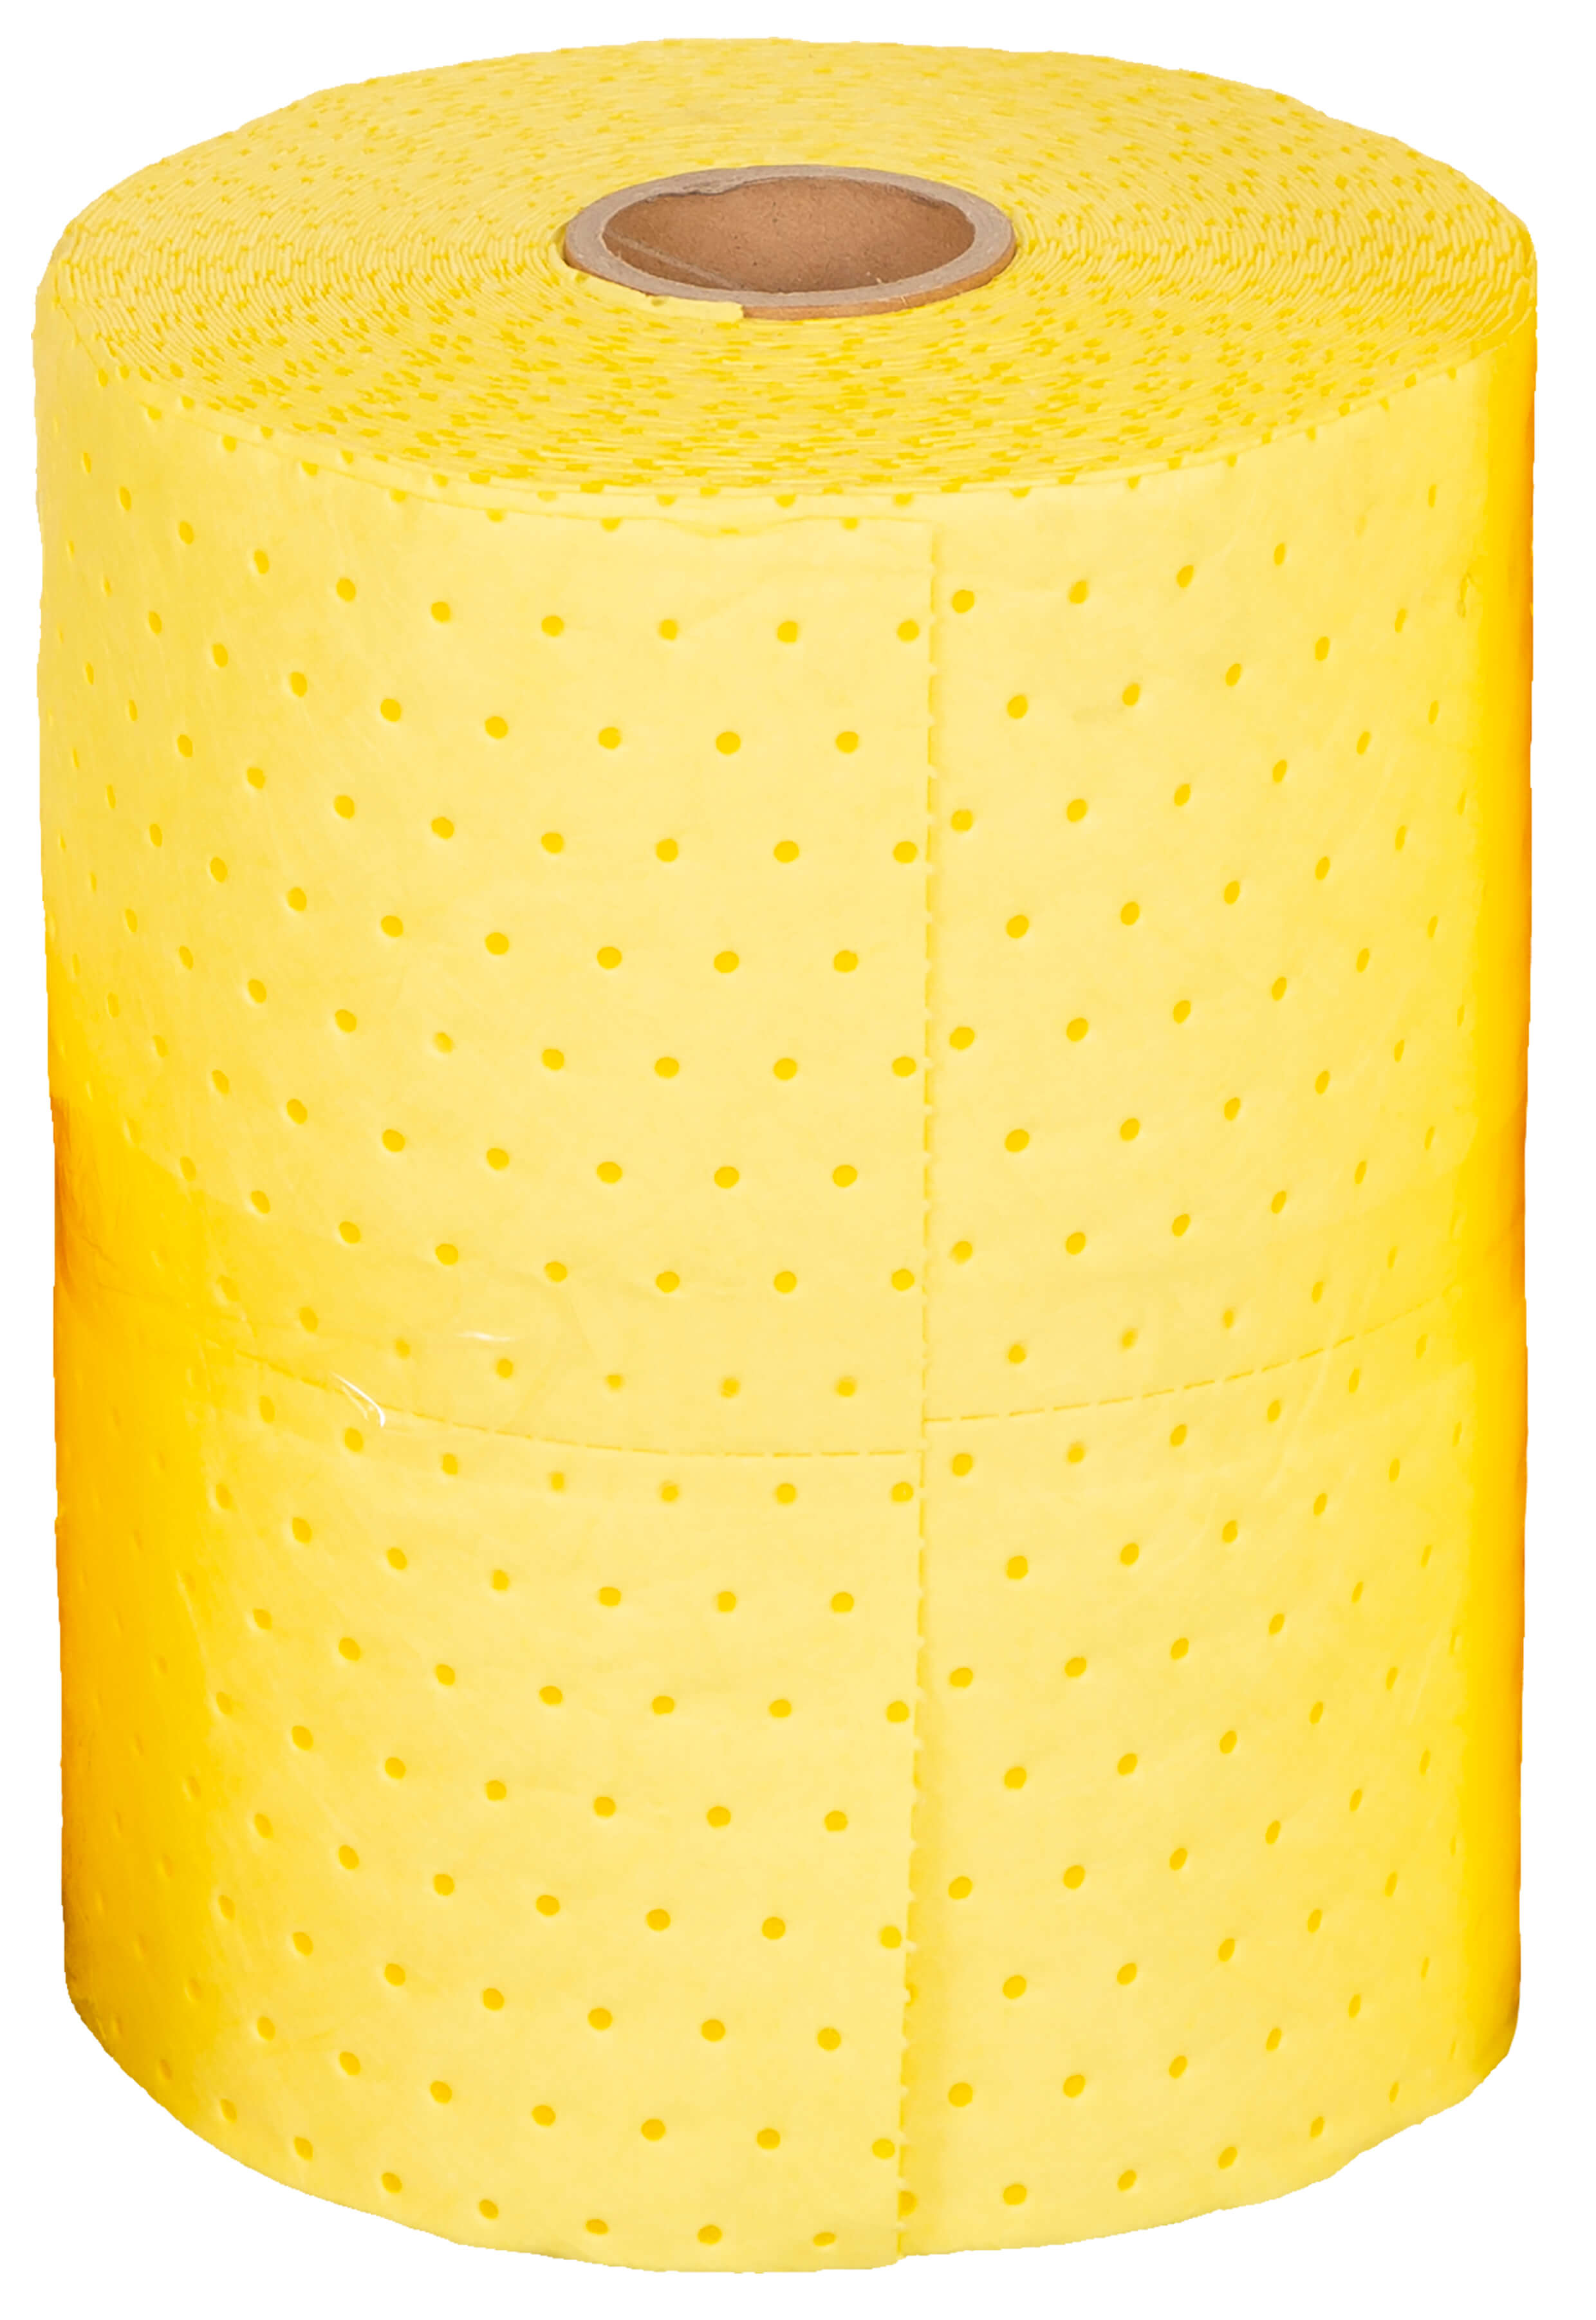 Medium Weight Chemical Absorbent Roll 38cm x 40m 